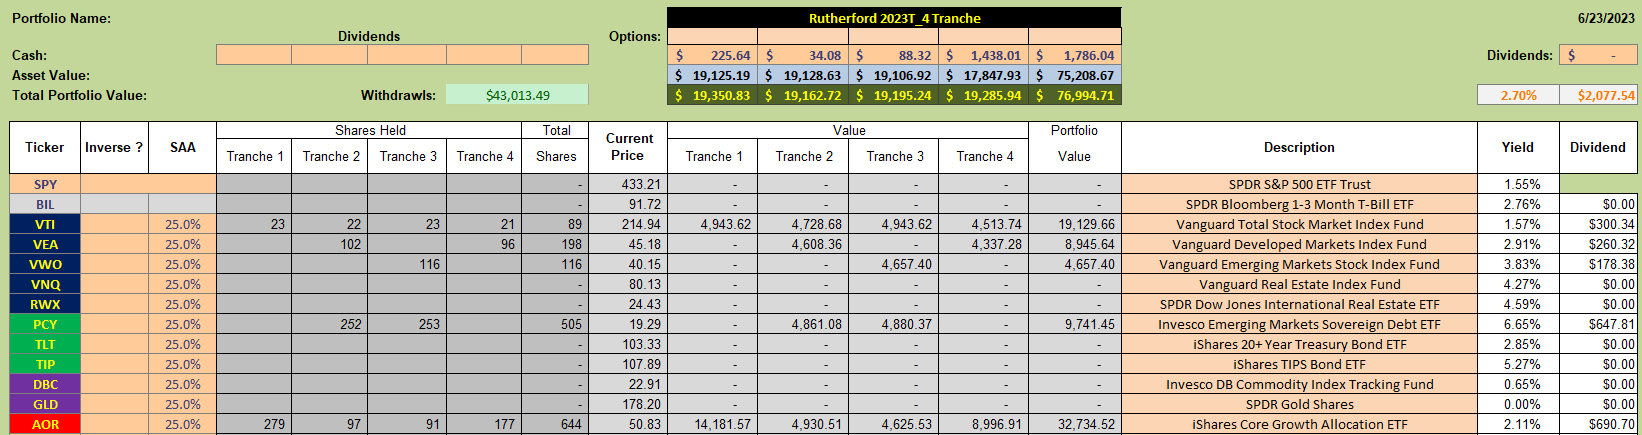 Rutherford Portfolio Review (Tranche 4): 23 June 2023 4